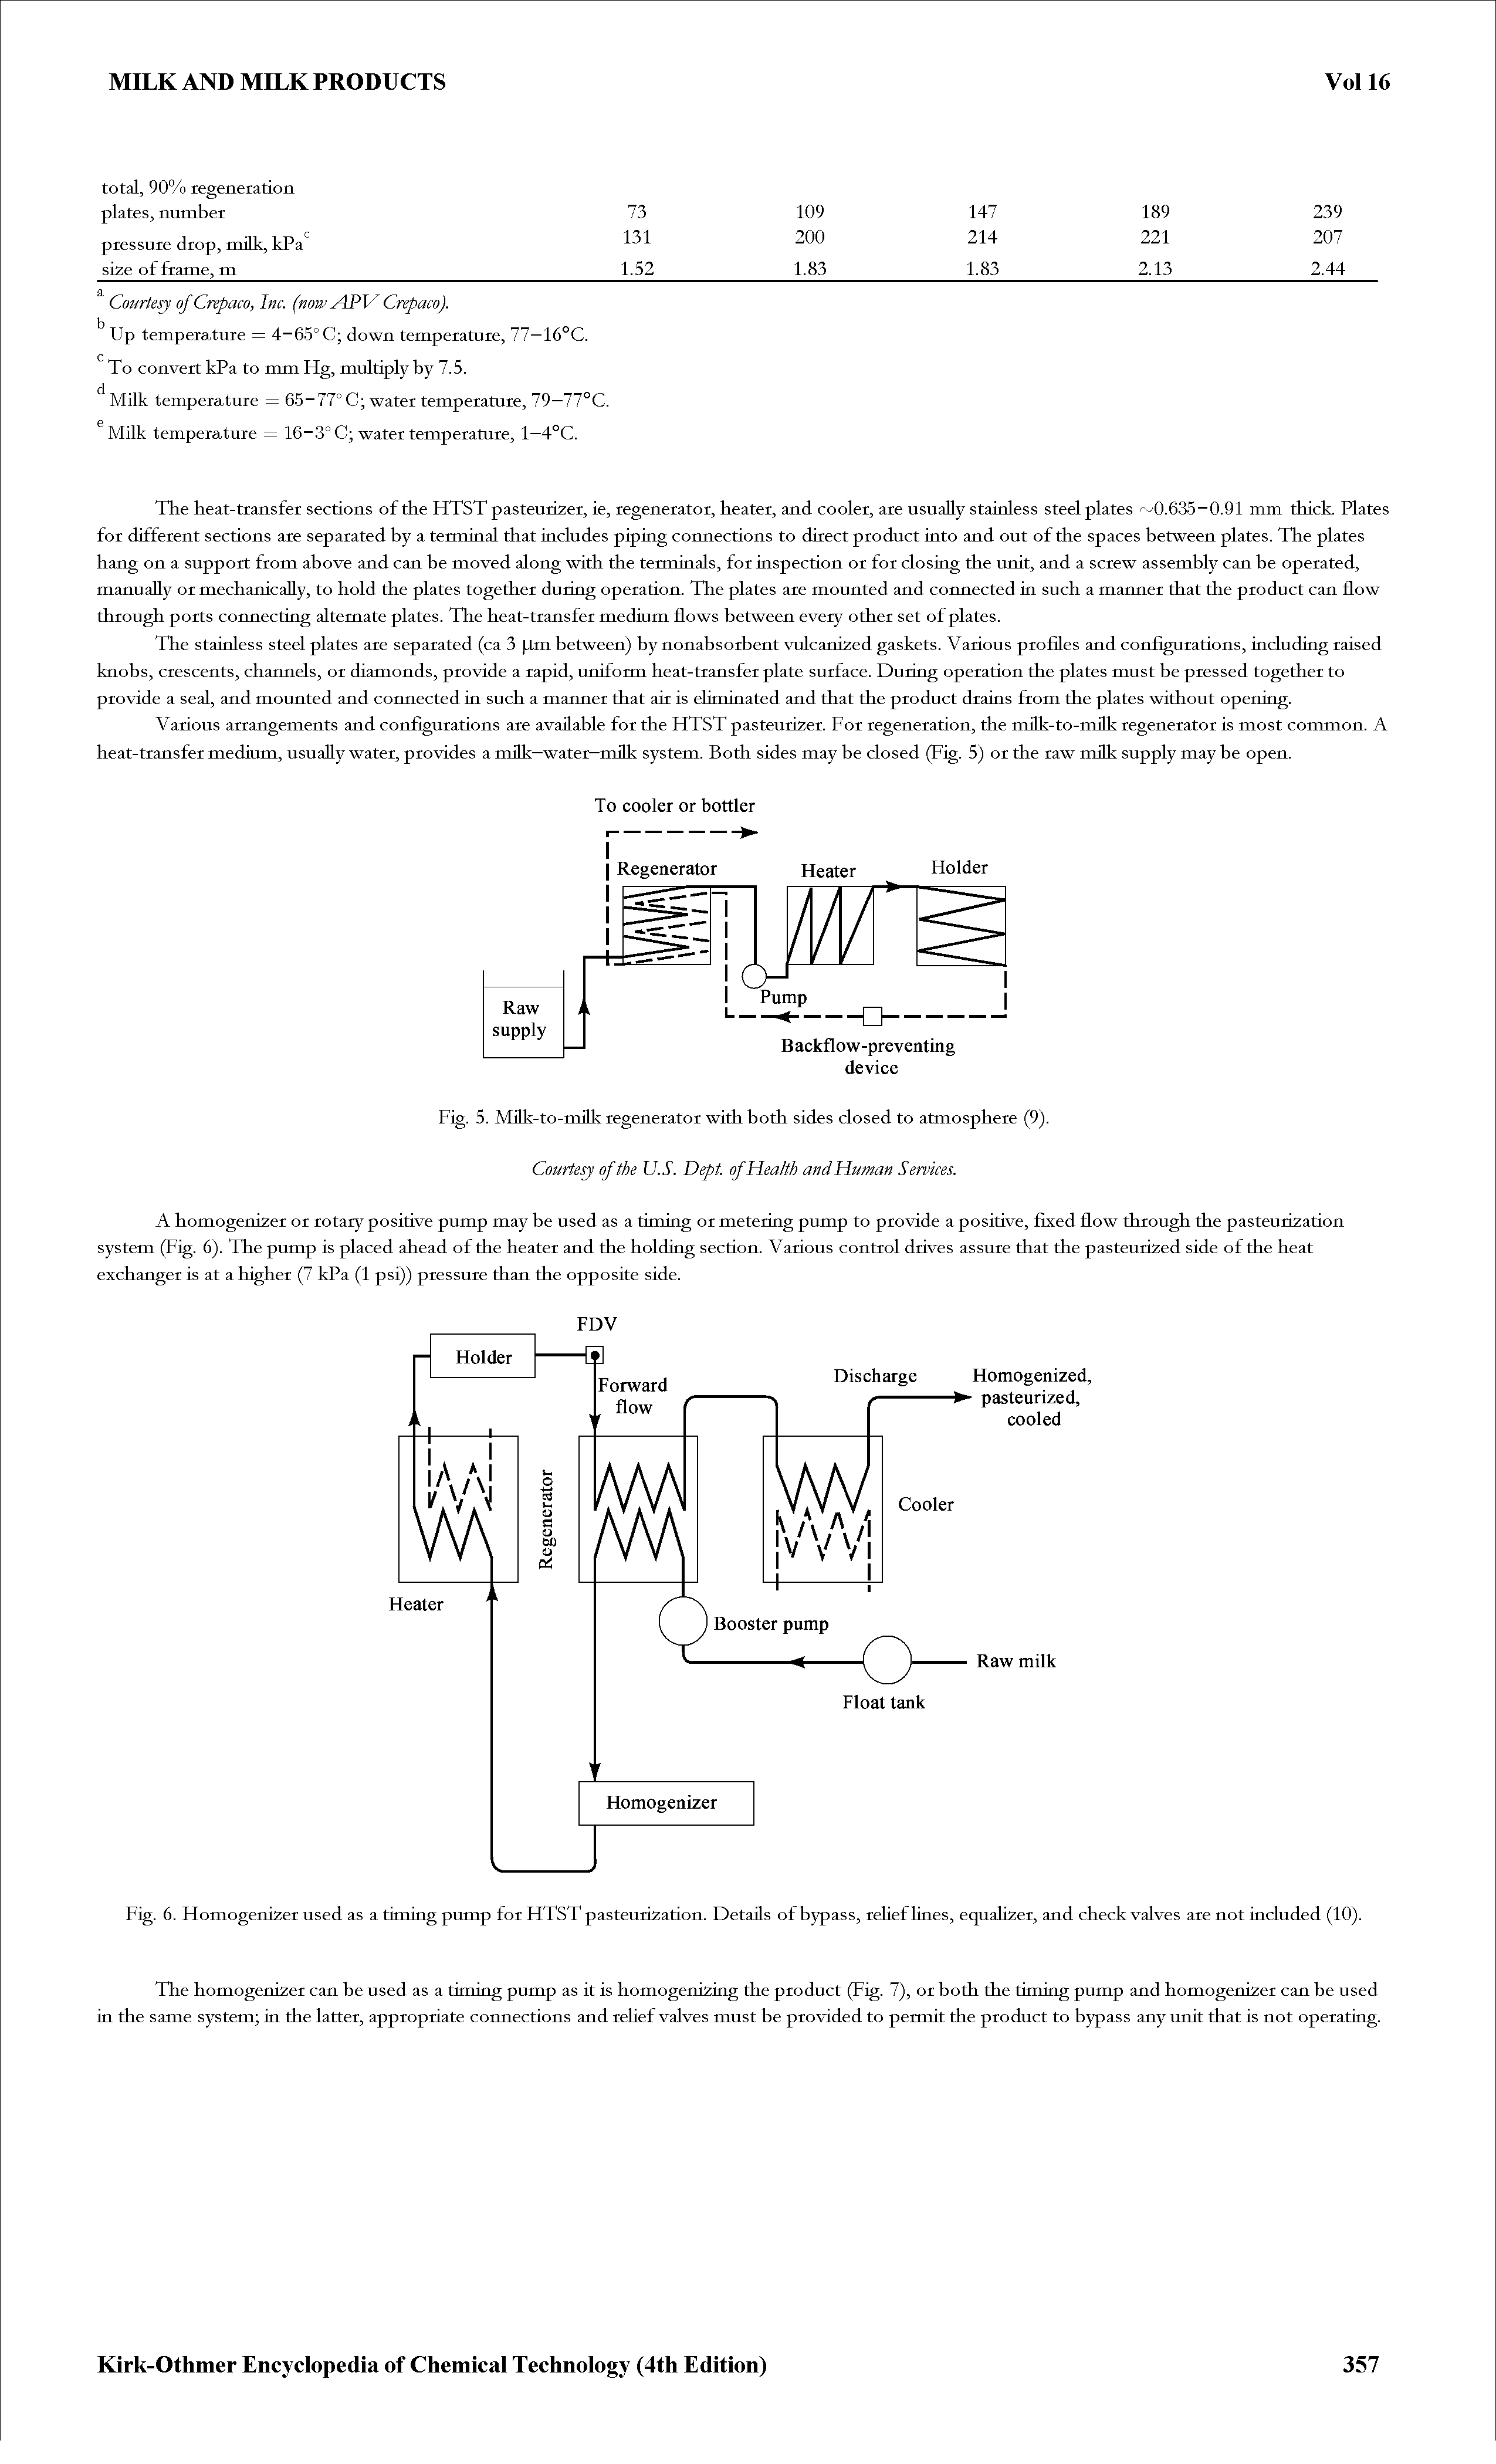 Fig. 6. Homogenizer used as a timing pump for HTST pasteurization. Details of bypass, relief lines, equalizer, and check valves are not included (10).